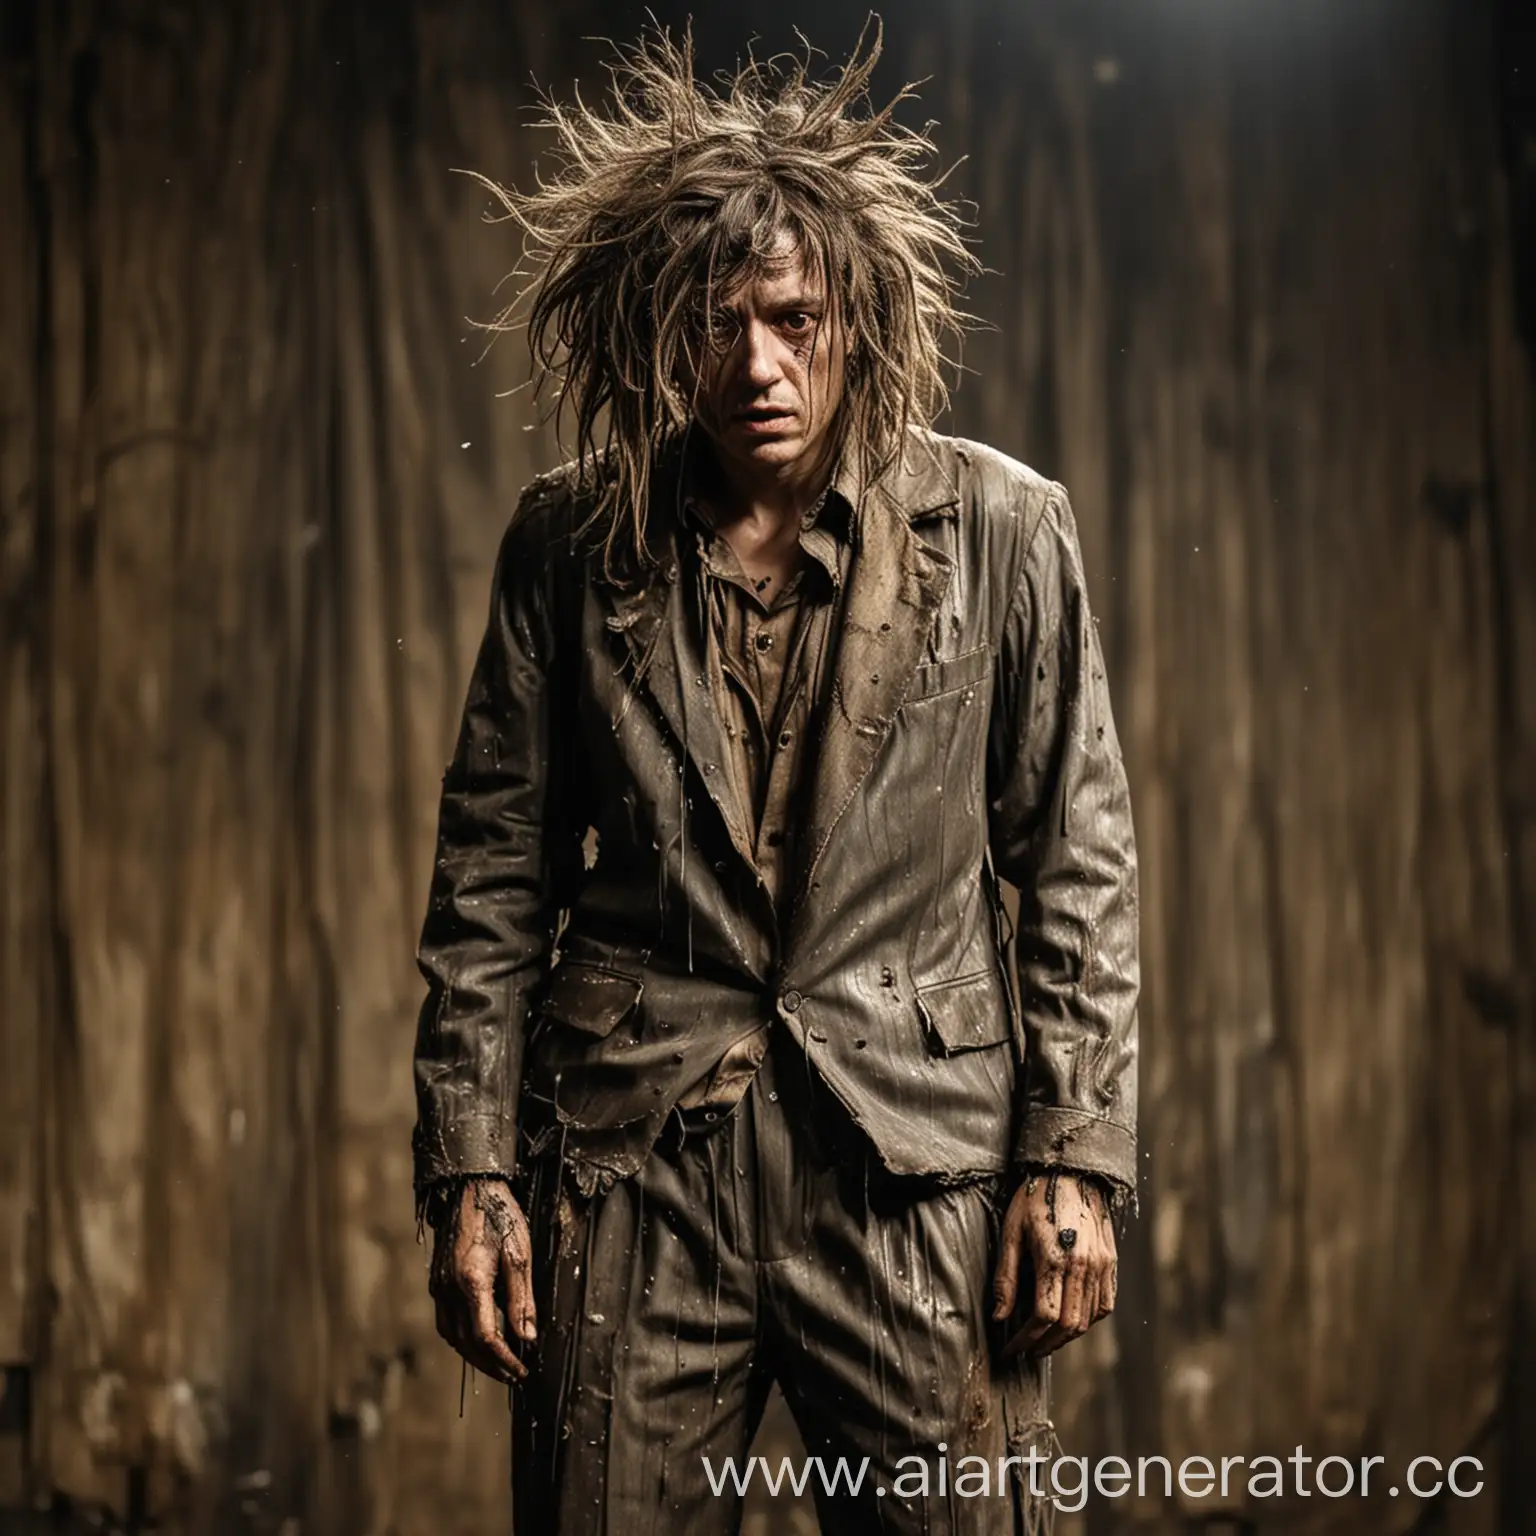 Disheveled-Depressive-Character-on-Stage-in-Dirty-Suit